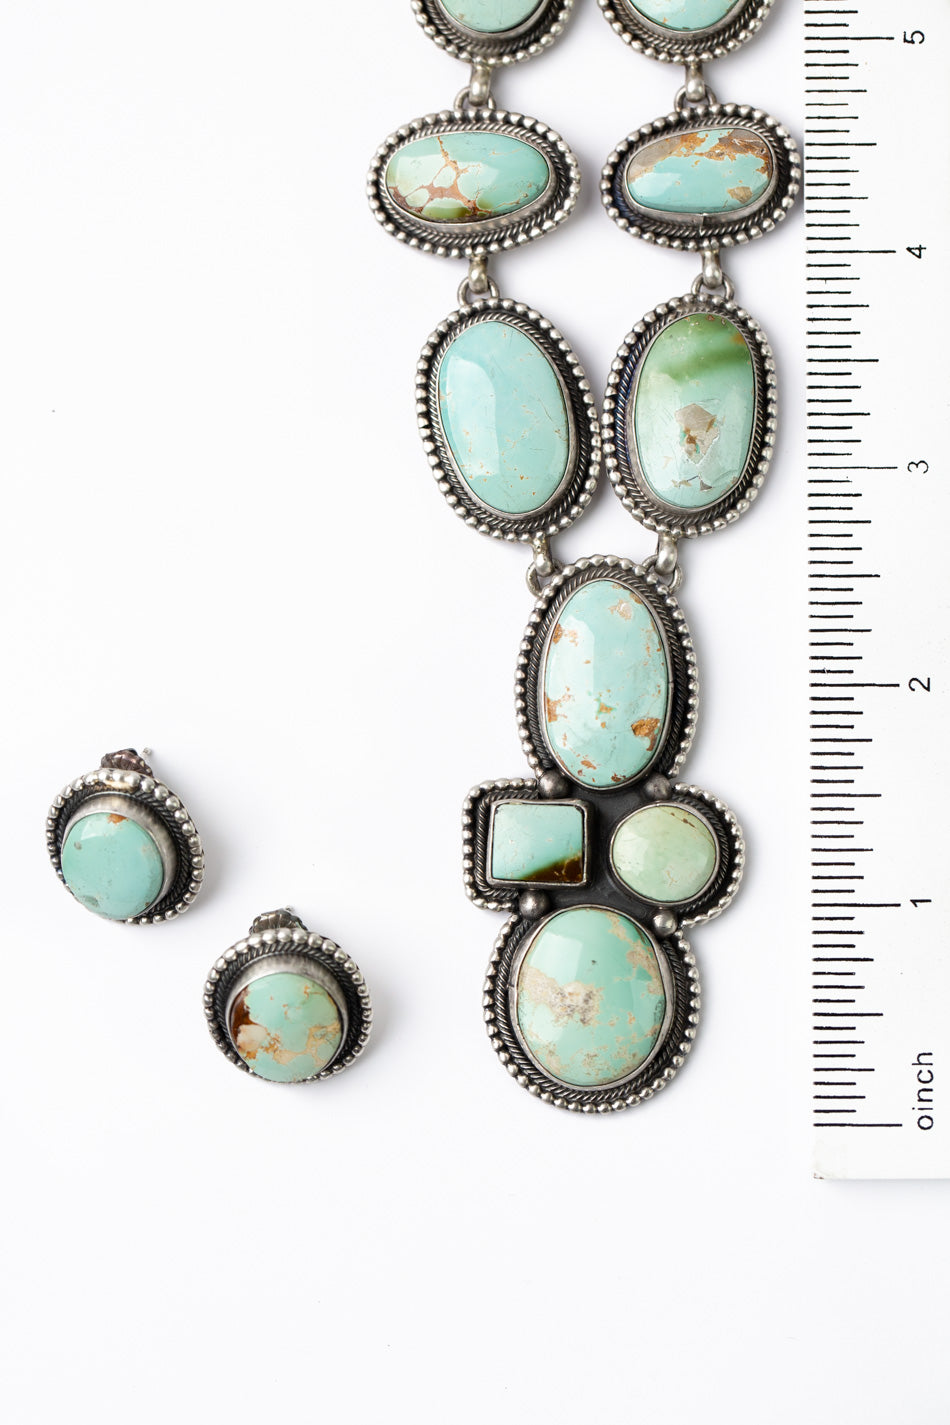 Darrin Livingston 19" Handmade Royston Turquoise Statement Necklace And Earrings Set